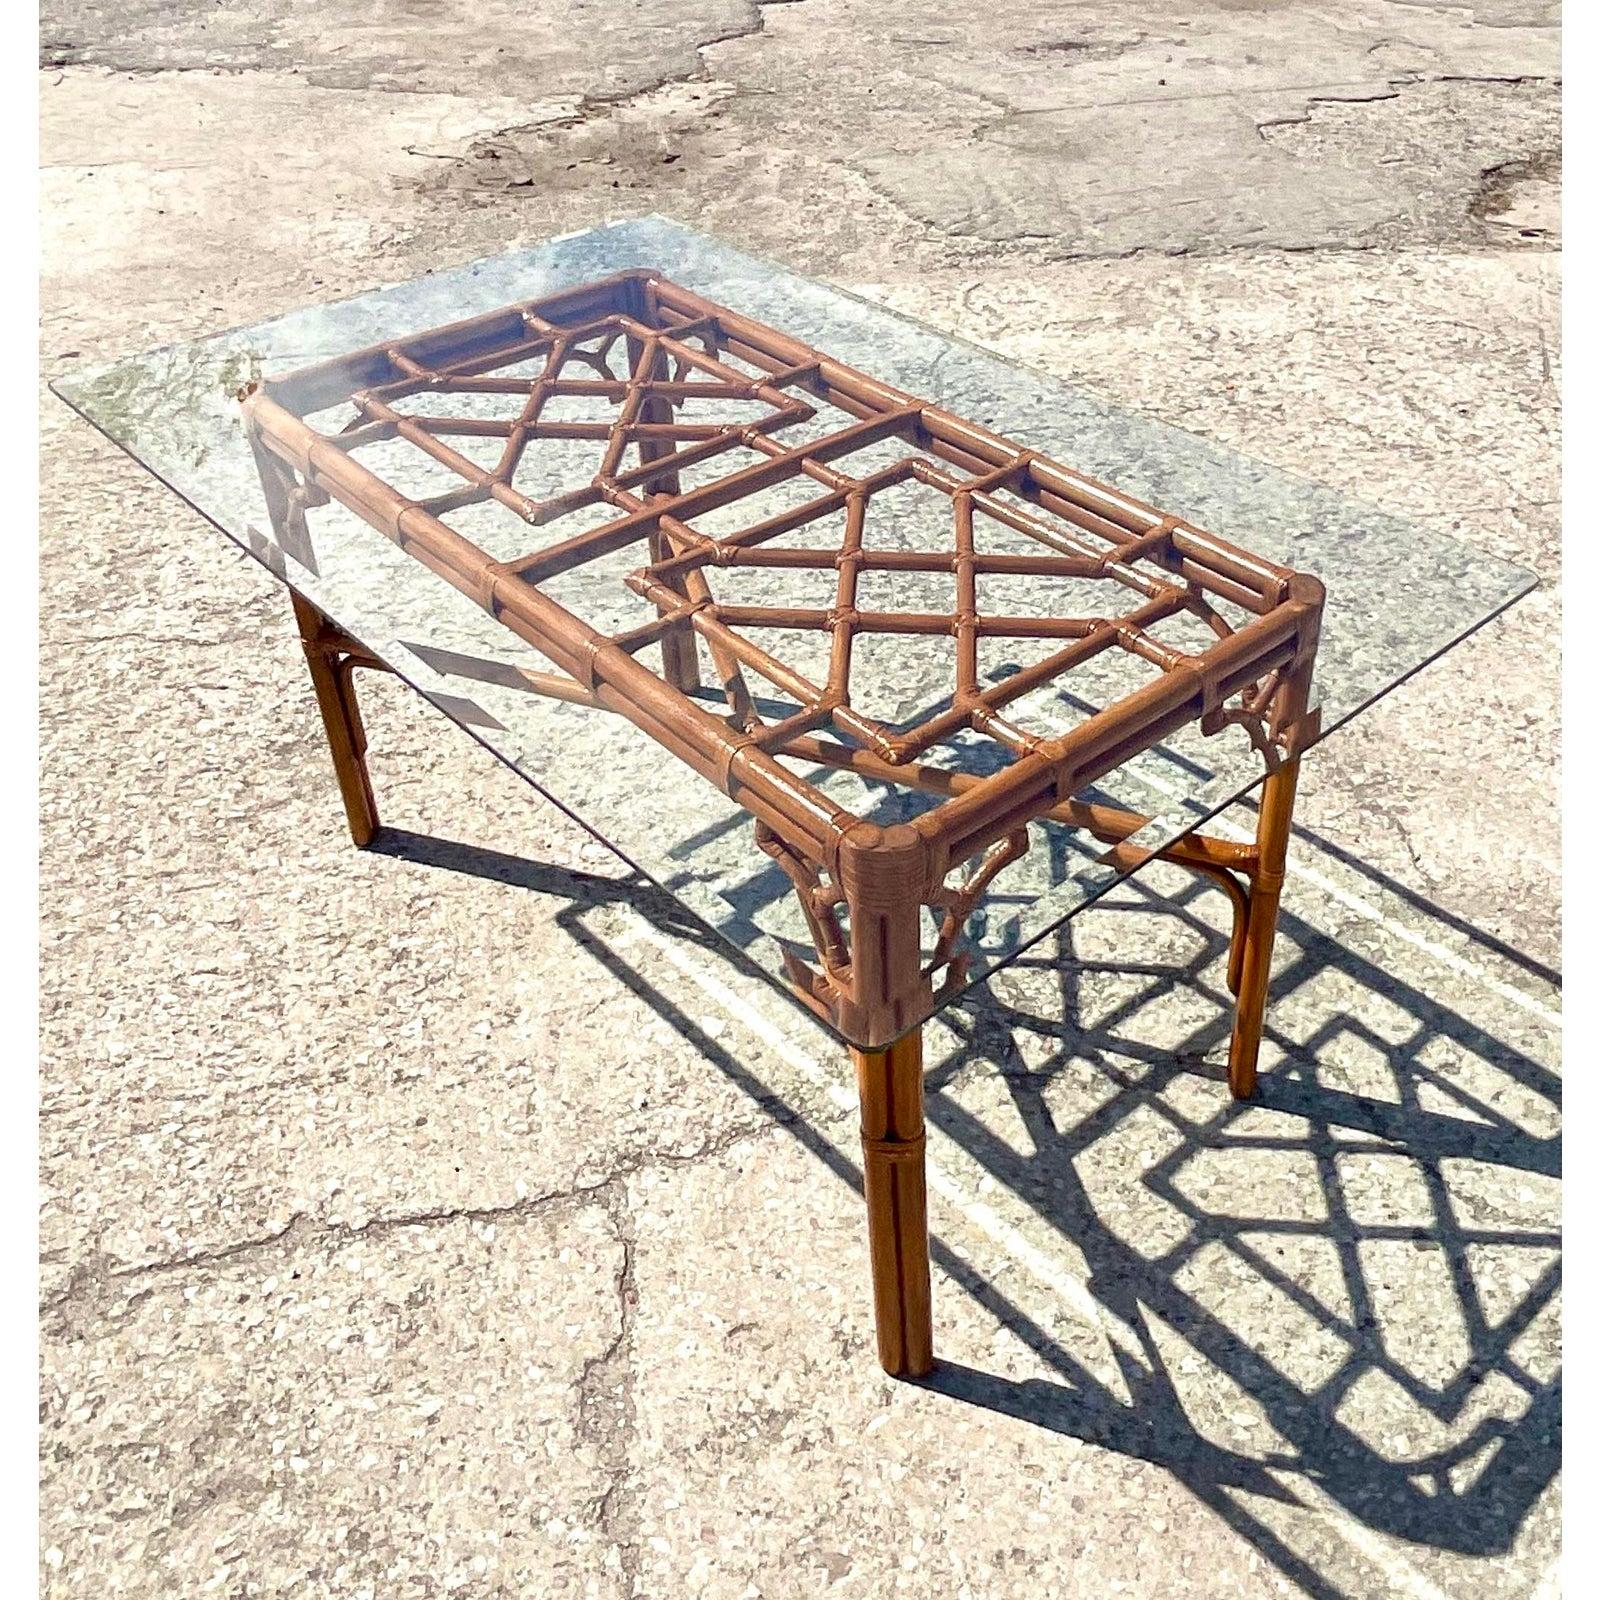 Fantastic vintage Coastal dining table. A chic dark rattan frame with a coveted Chinese Chippendale design. Glass top rests on the frame. Acquired from a Palm Beach estate.